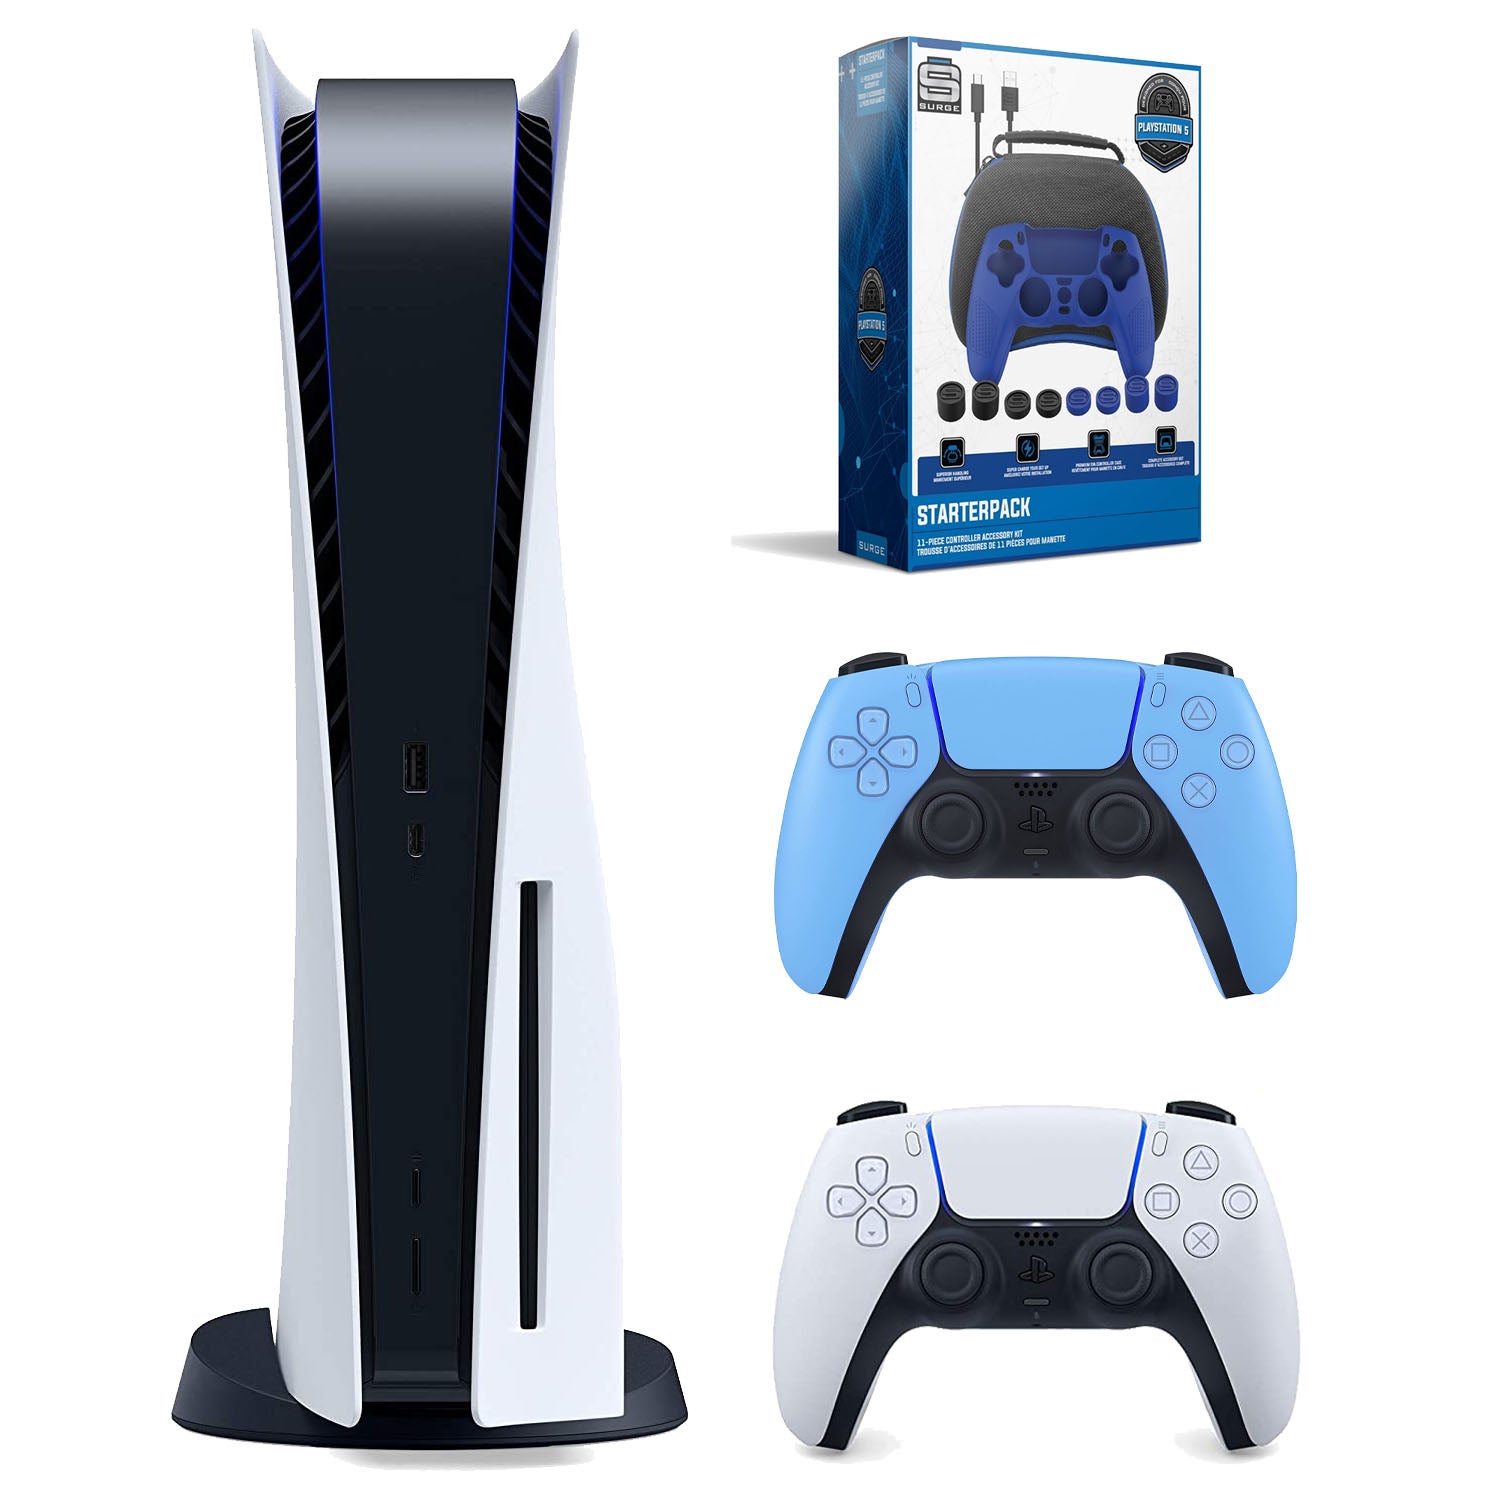 Sony Playstation 5 Disc Version Console (Japan Import) with Extra Bllue Controller and Surge Pro Gamer Starter Pack 11-Piece Accessory Kit - Pro-Distributing